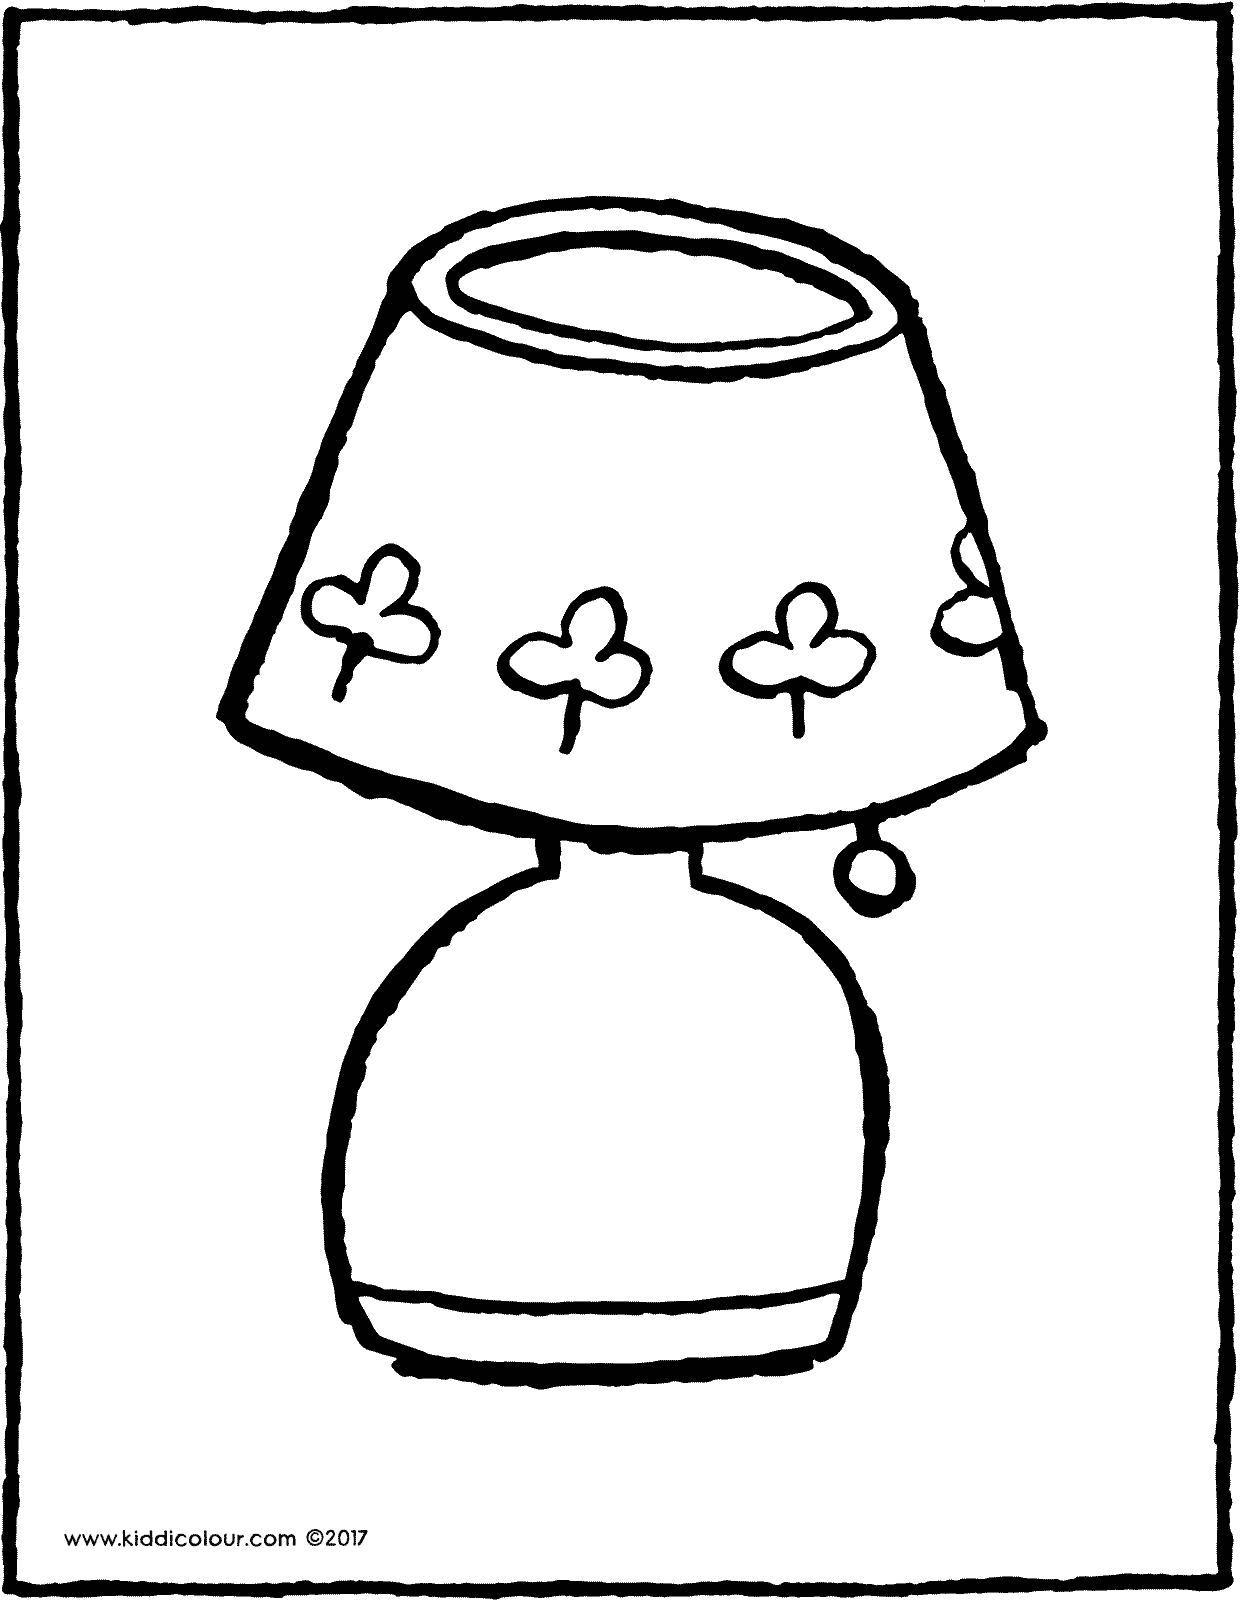 lamp-coloring-page-at-getcolorings-free-printable-colorings-pages-to-print-and-color